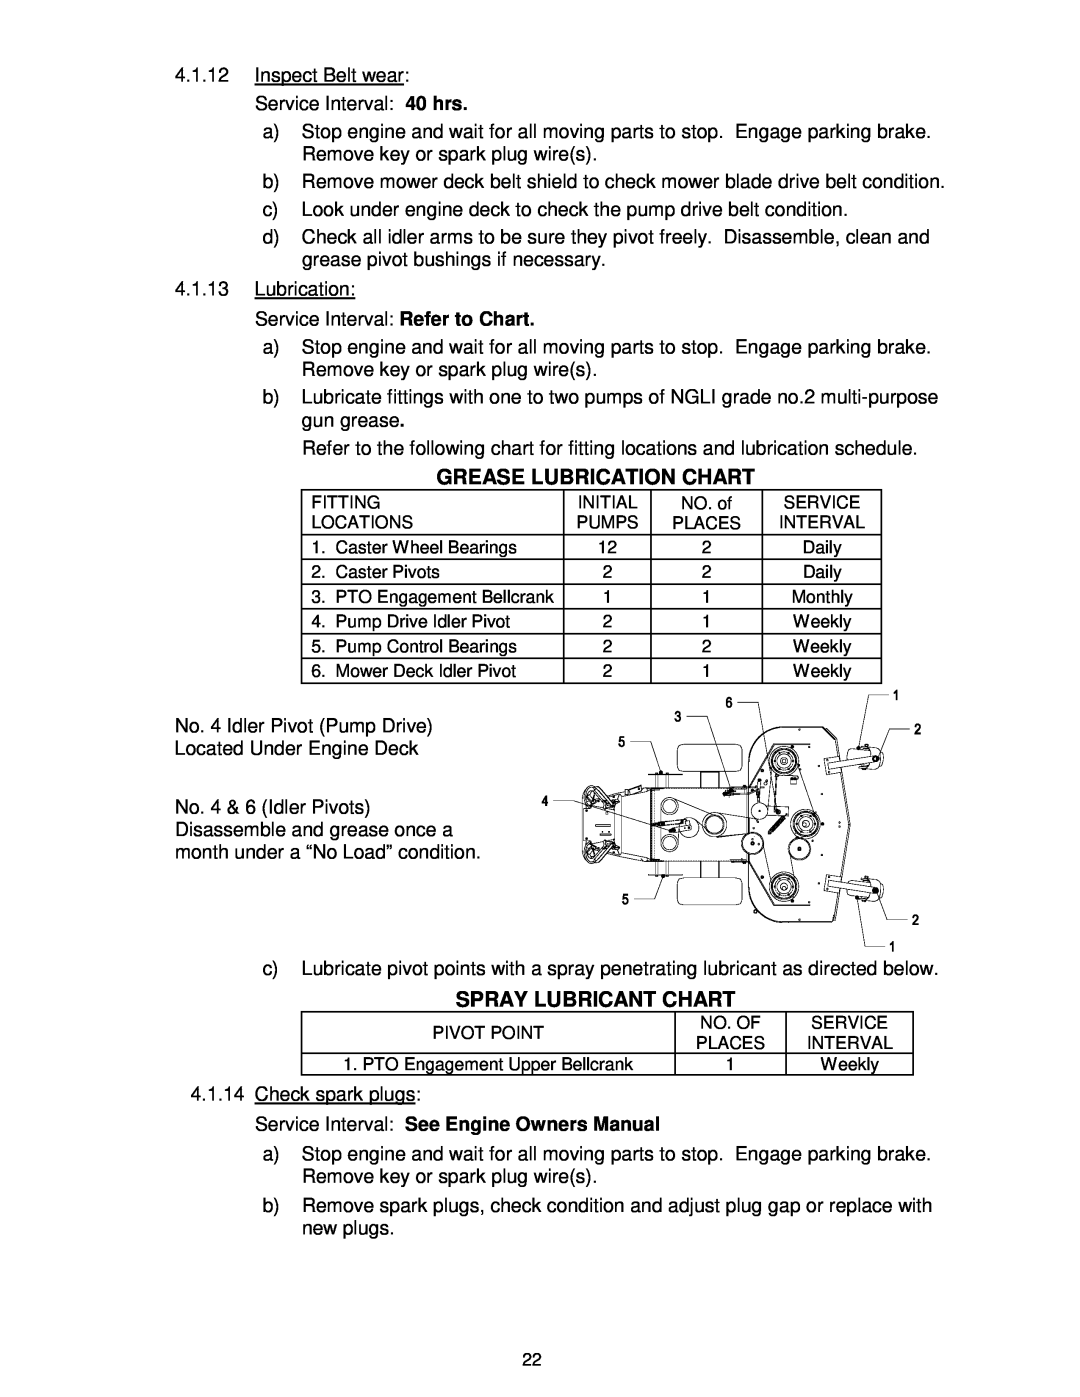 Exmark VH15KA362, VH15KA483 Grease Lubrication Chart, Spray Lubricant Chart, Service Interval See Engine Owners Manual 